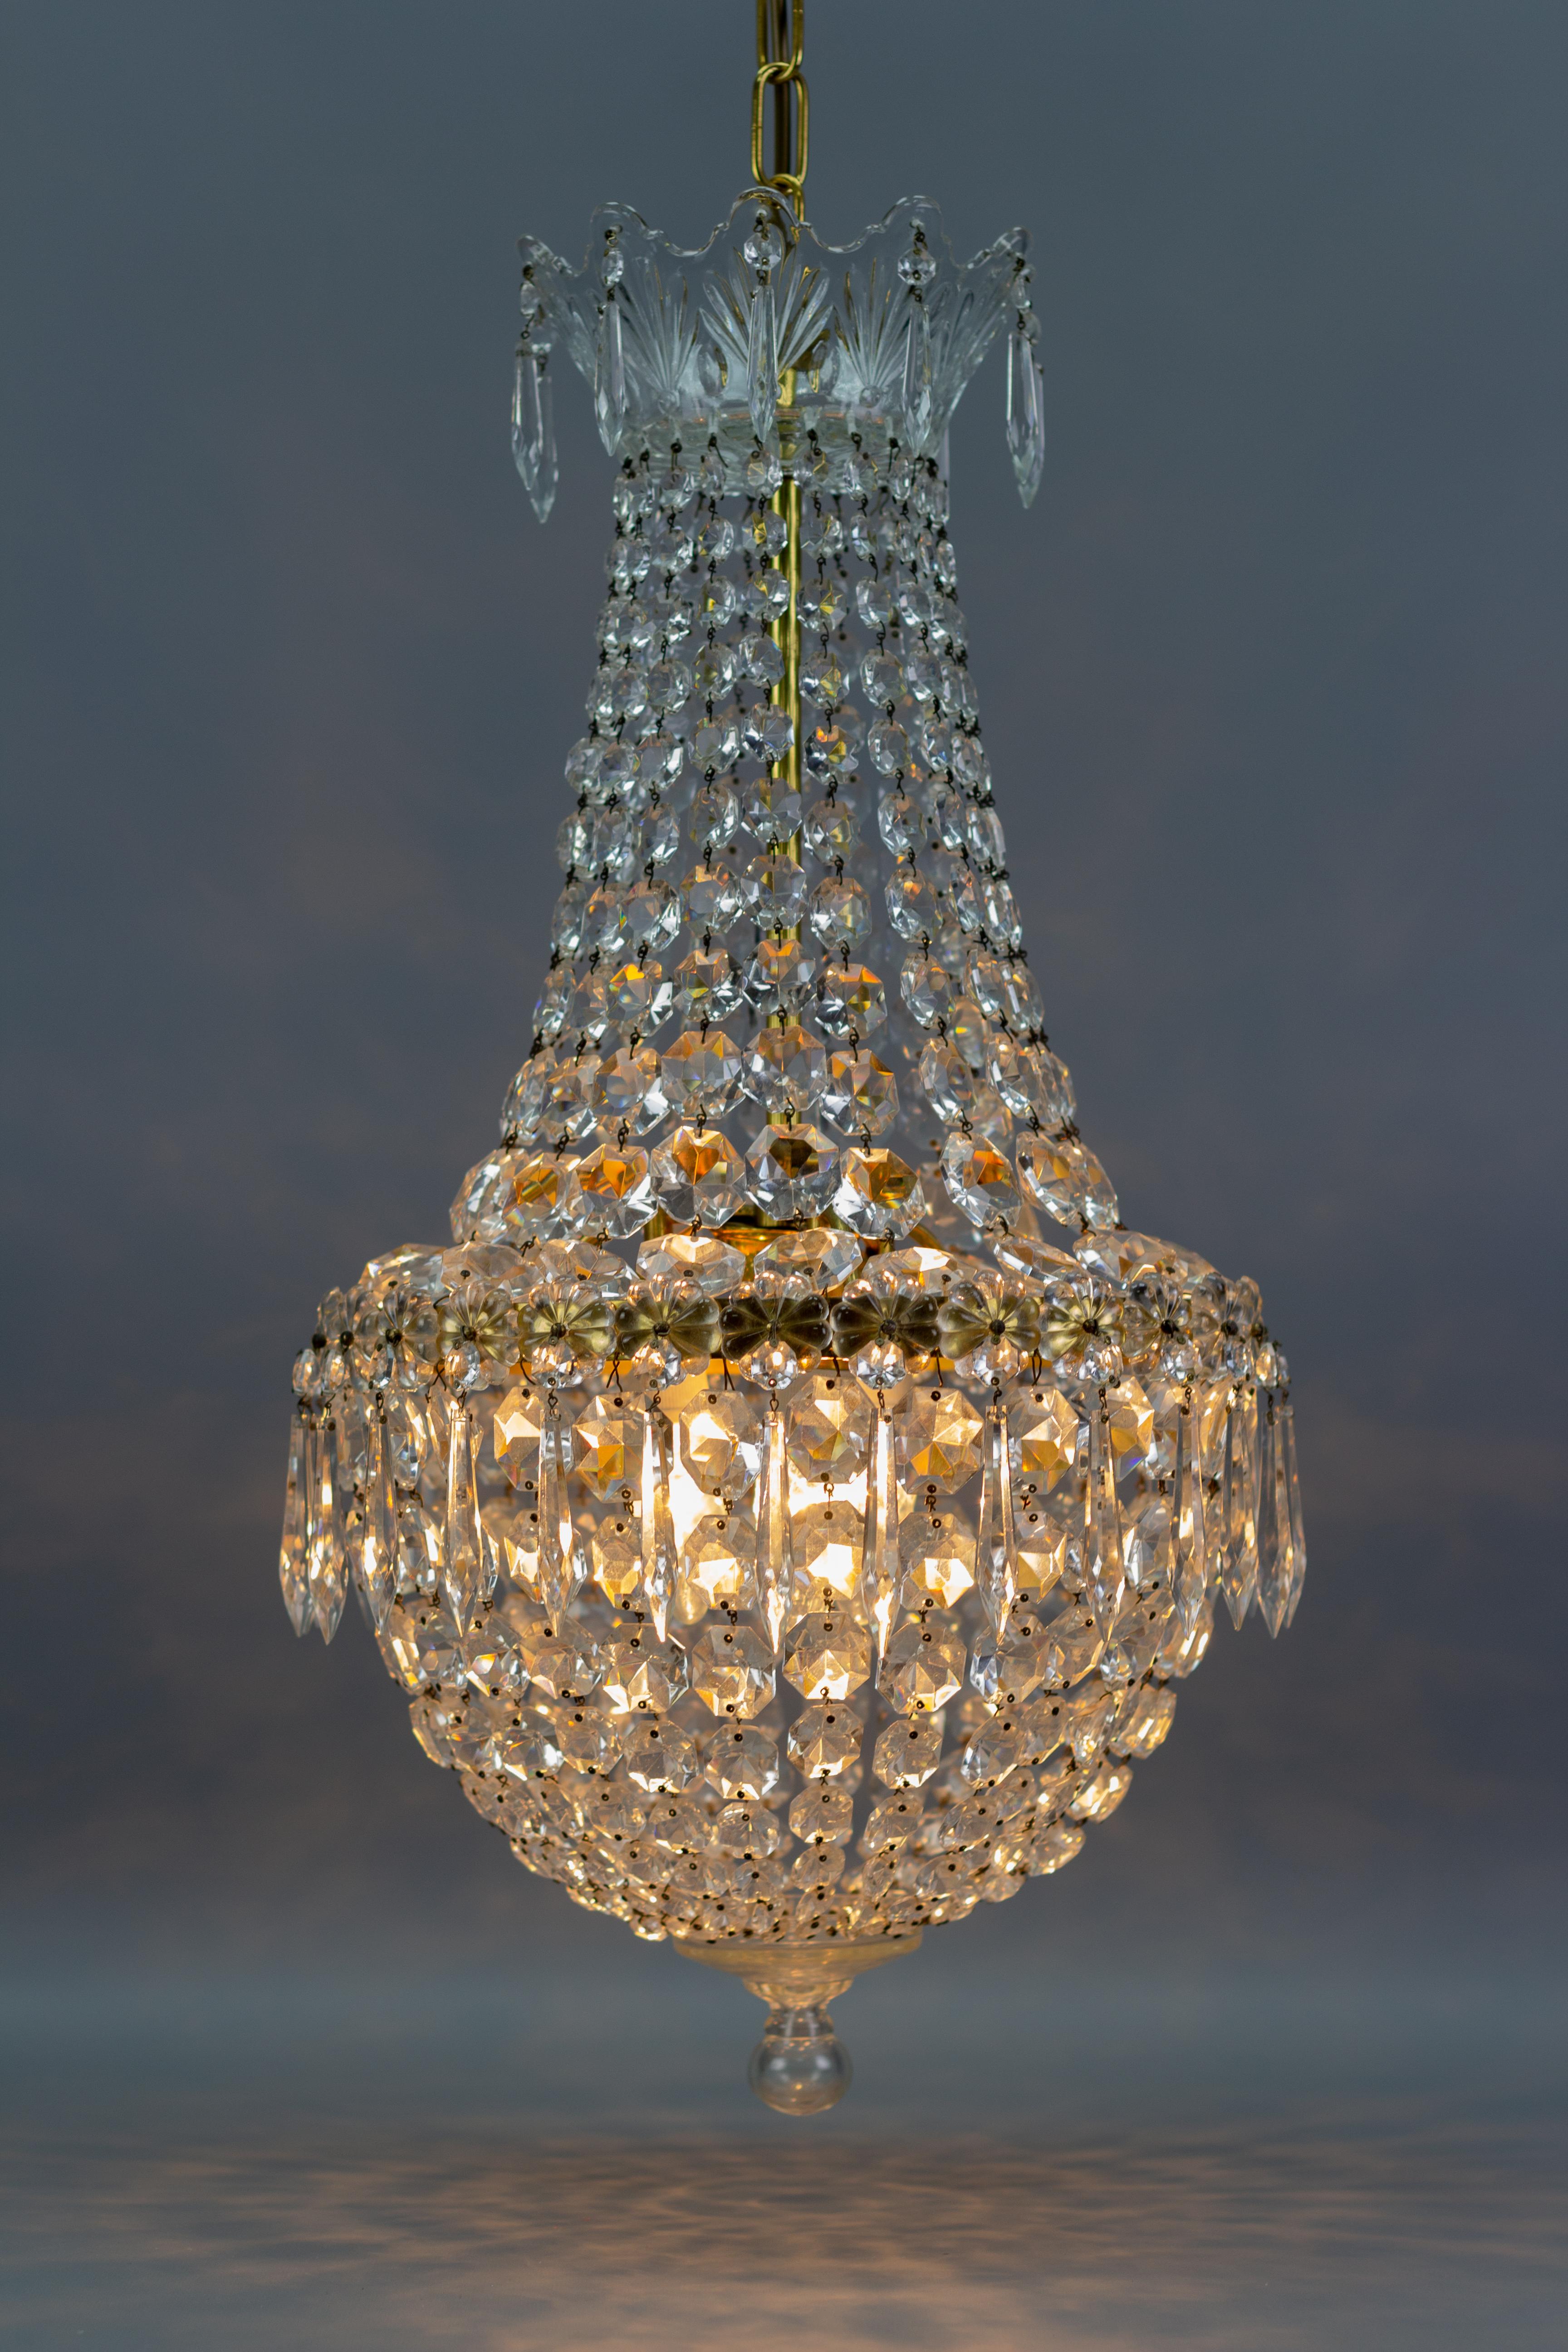 Mid-20th Century French Crystal Glass and Brass Three-Light Basket Chandelier